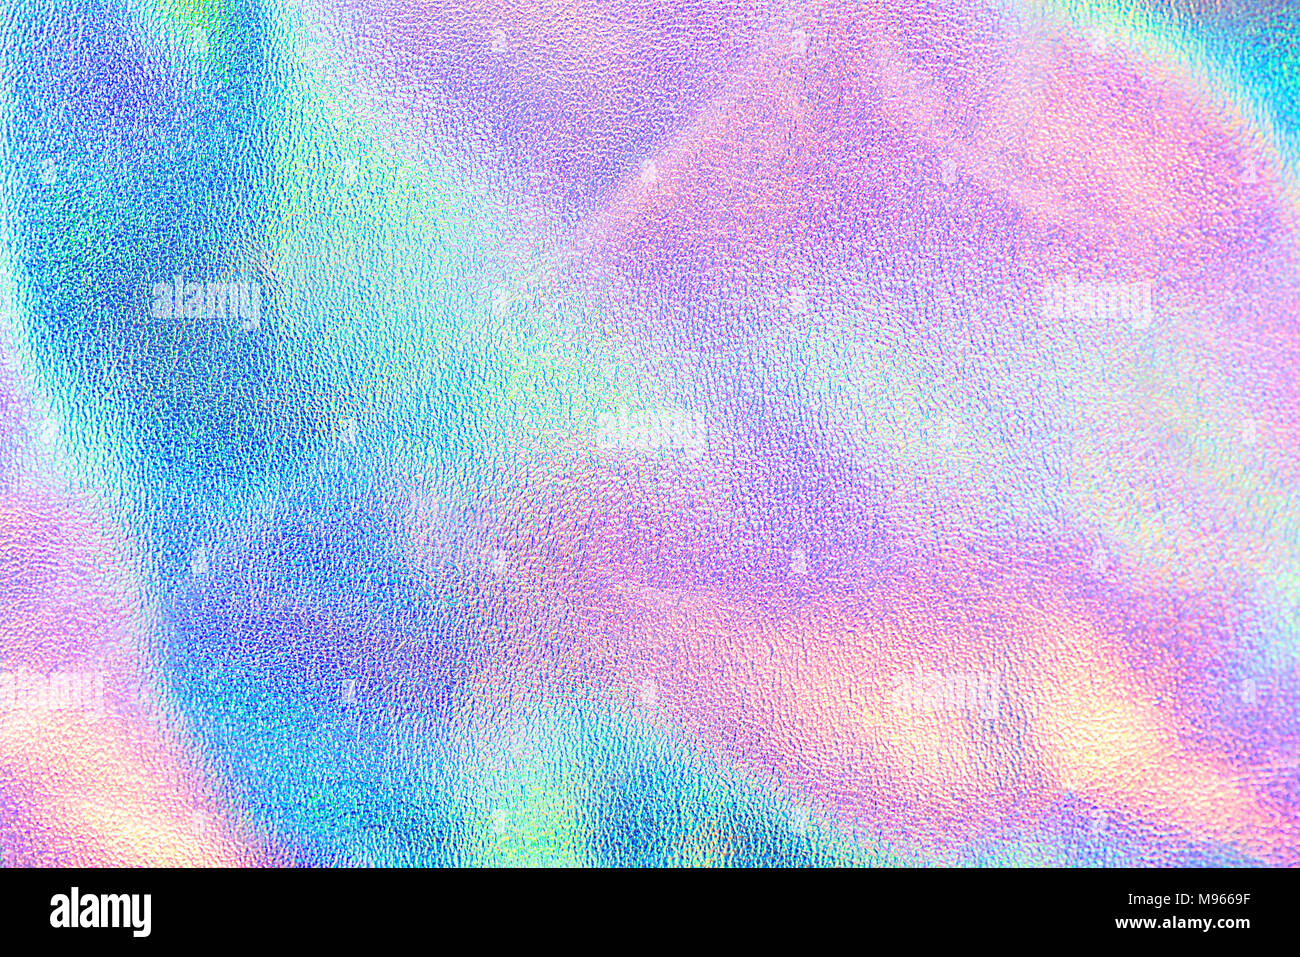 Holographic real texture in blue pink green colors with scratches and irregularities. Holographic color wrinkled foil. Holographic rainbow foil. Stock Photo